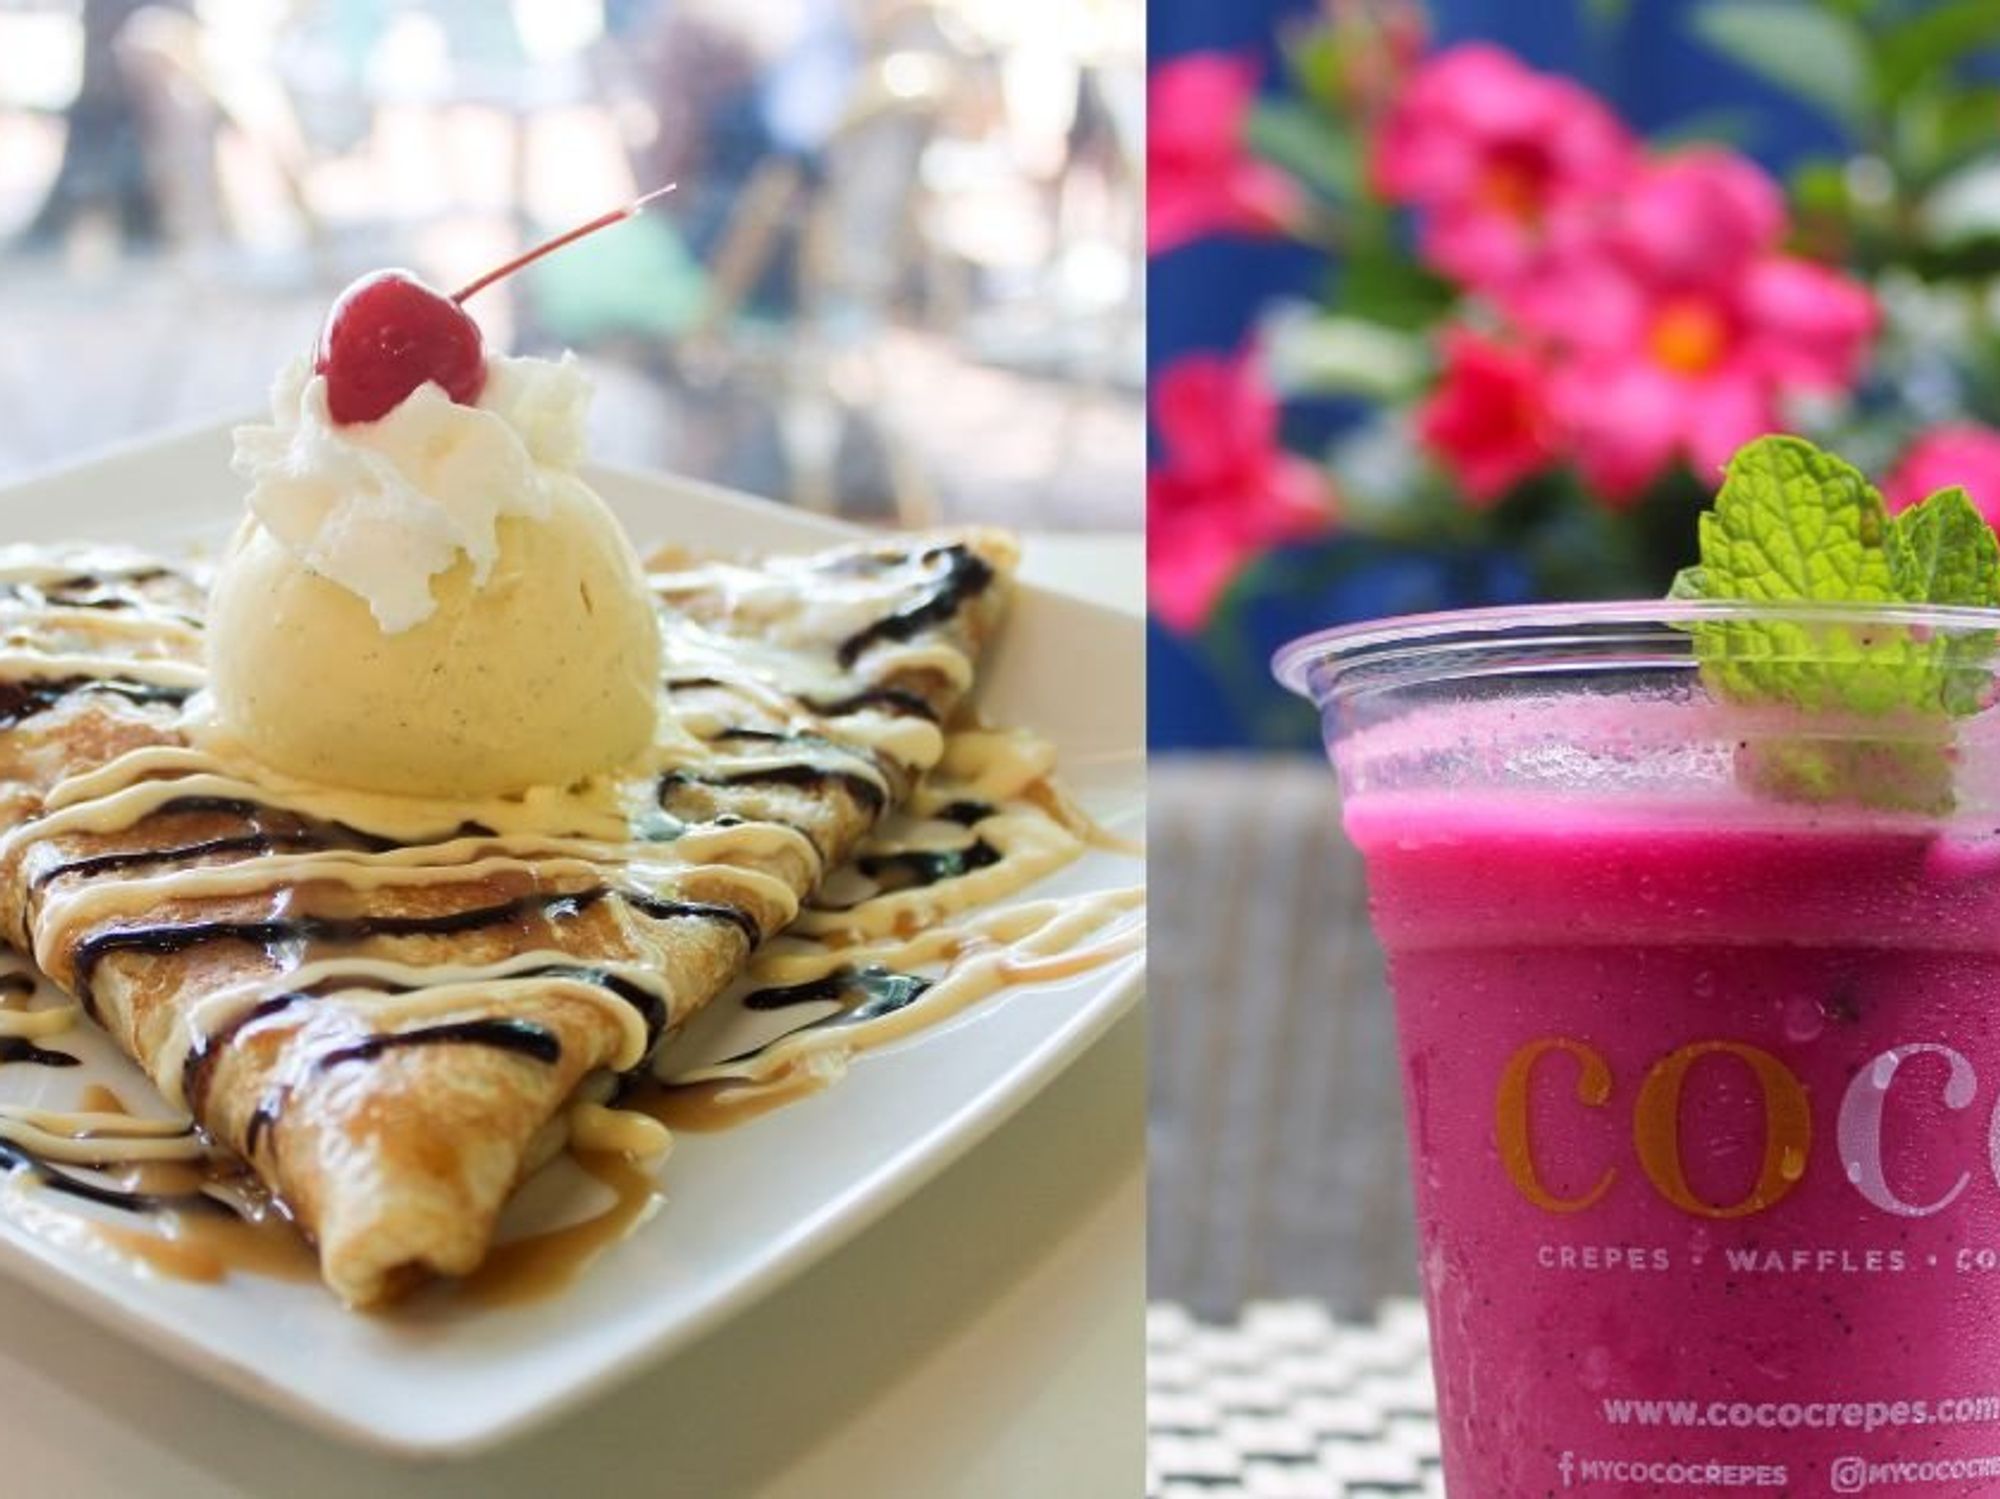 Coco Crepes & Coffee Banana Split Crepe and dragonfruit smoothie